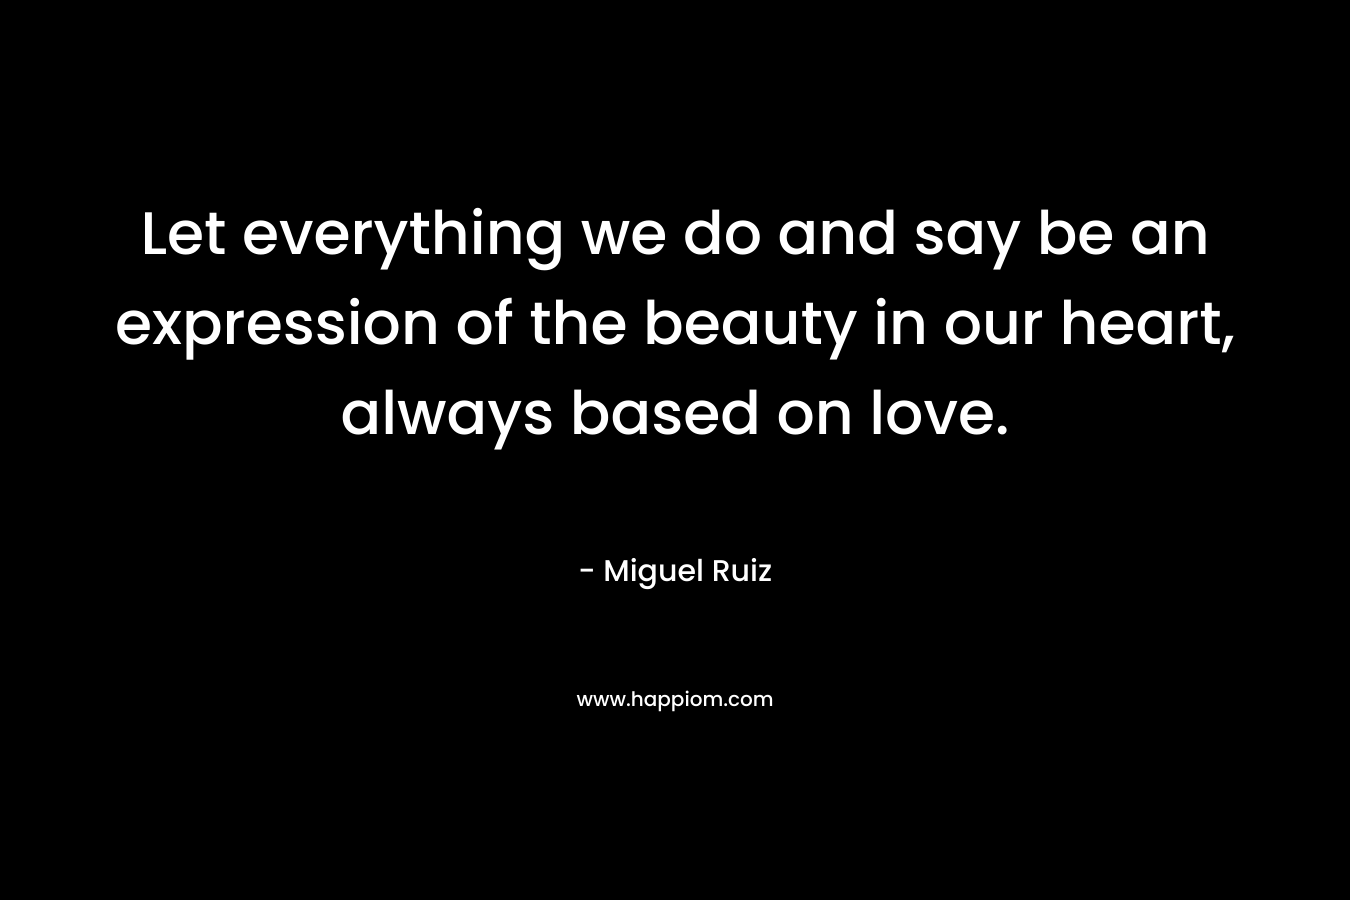 Let everything we do and say be an expression of the beauty in our heart, always based on love.